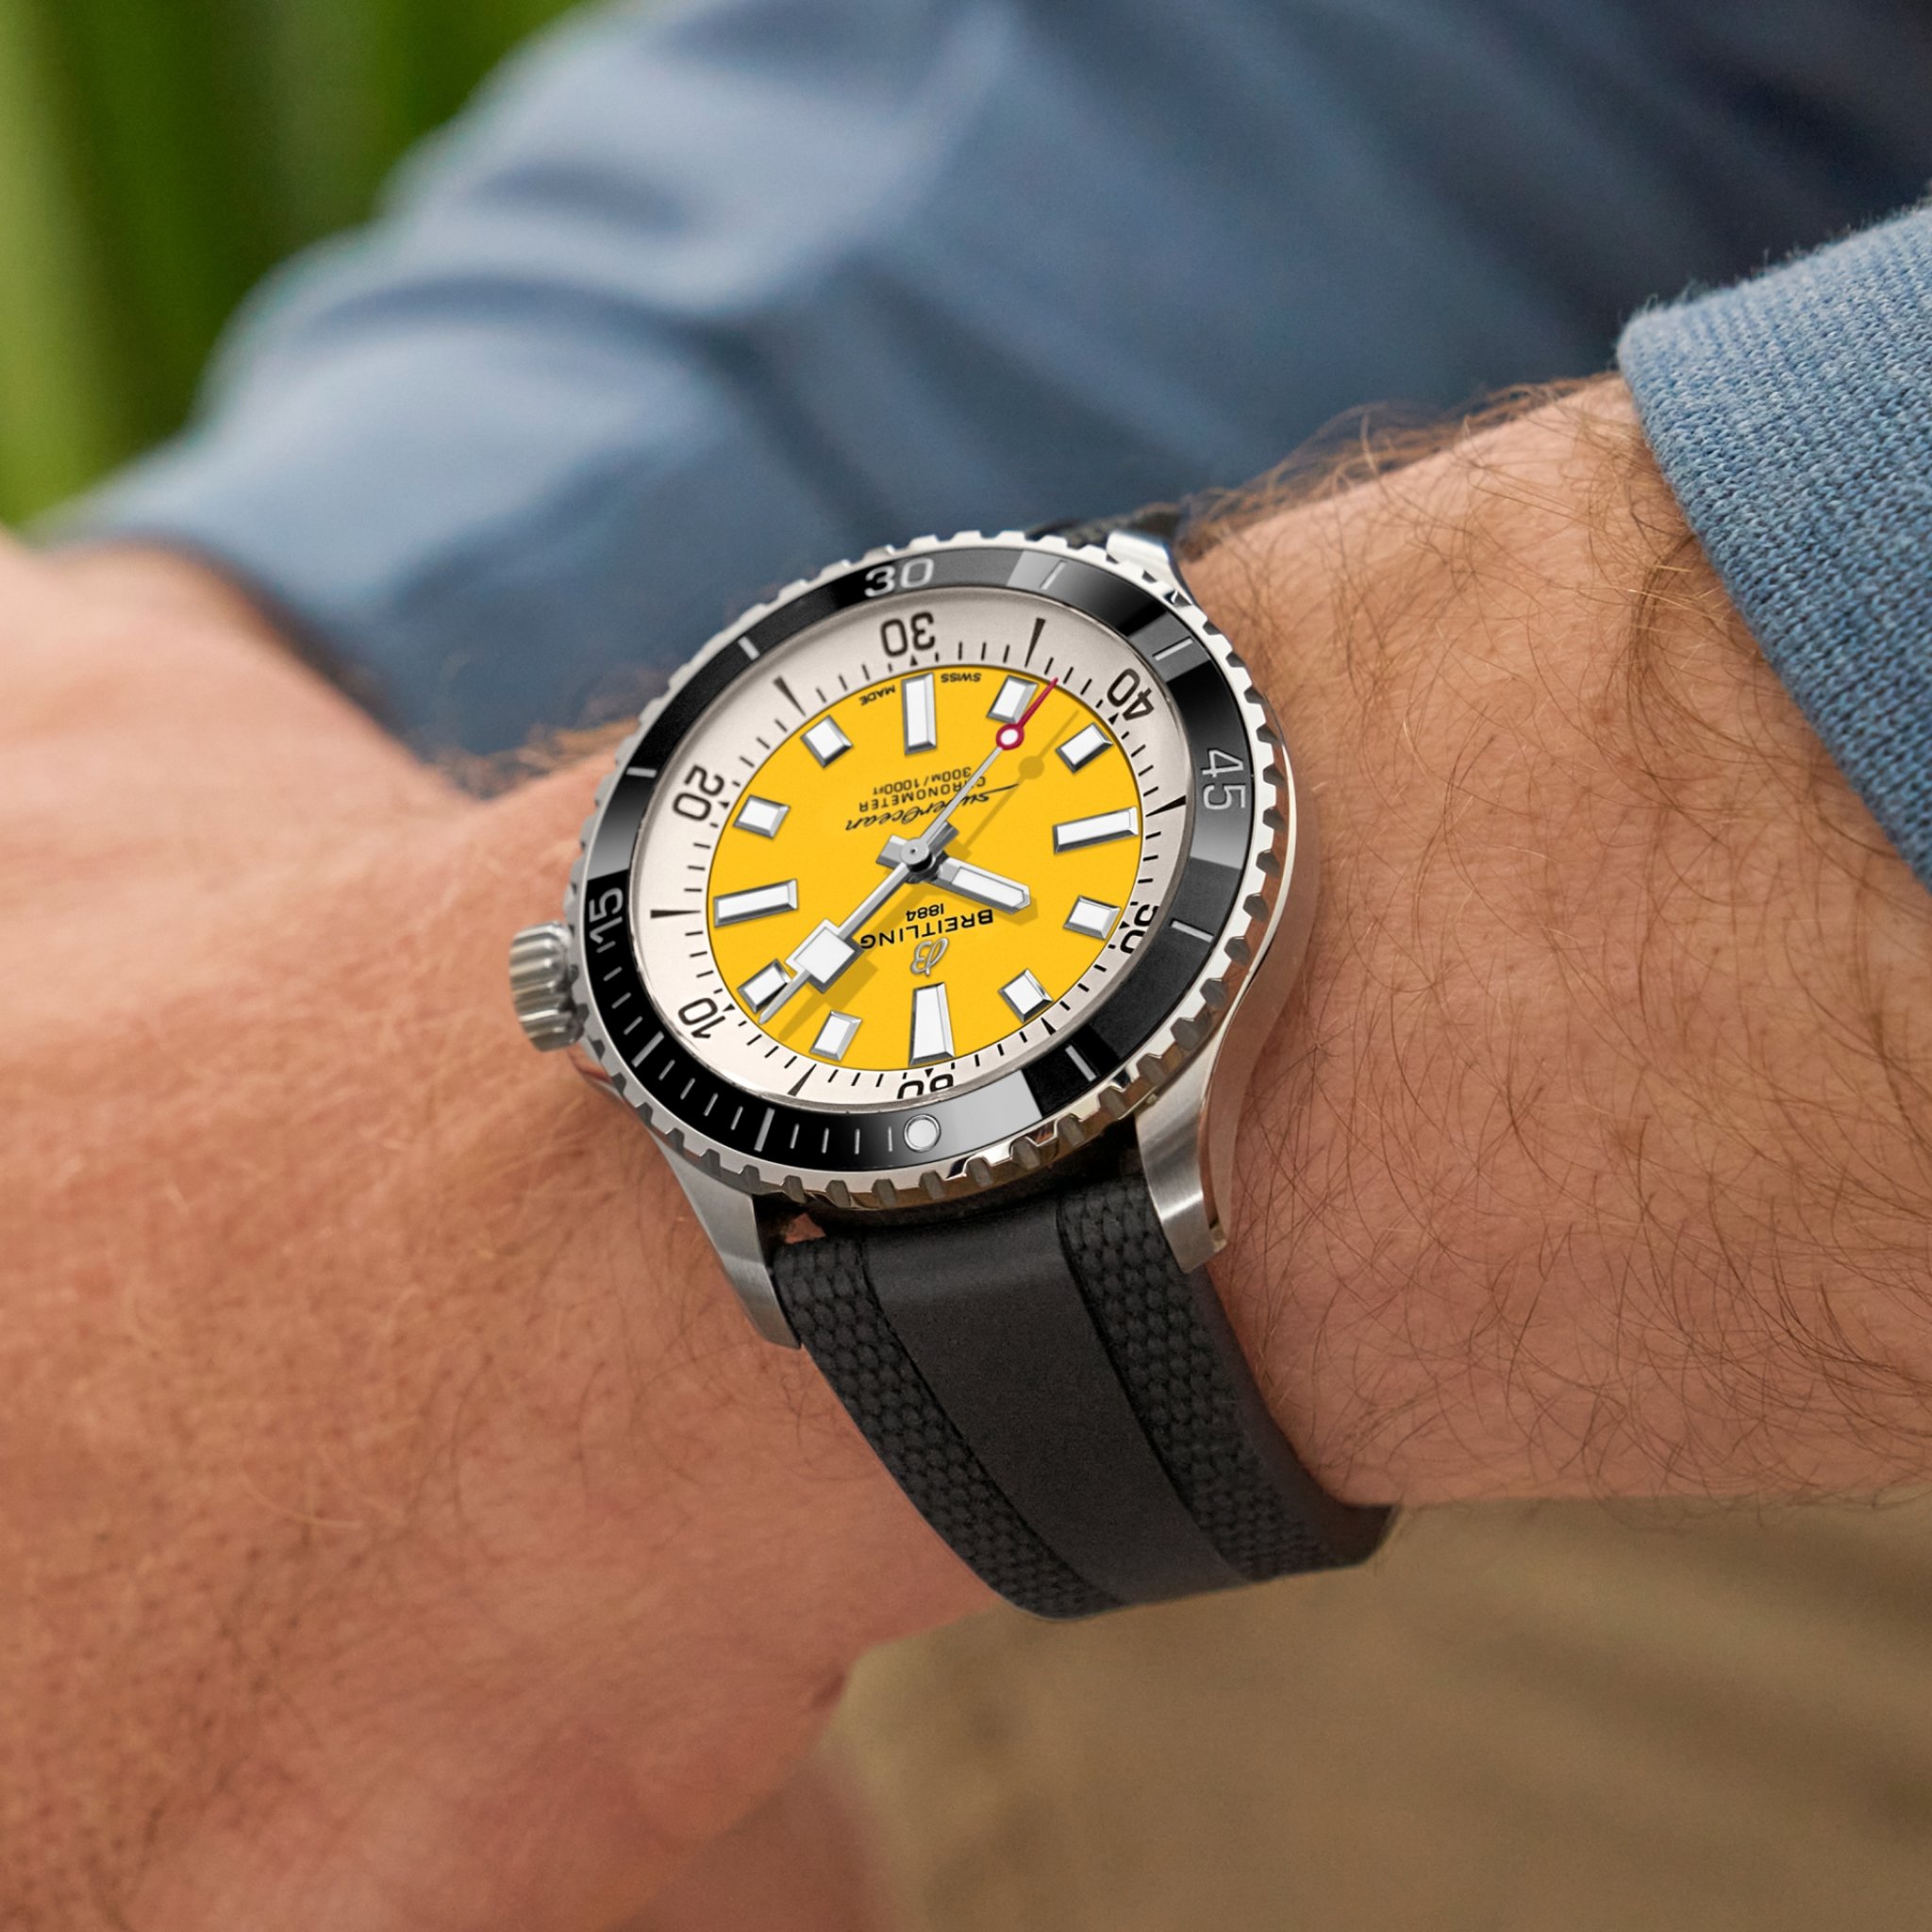 Buy Breitling Diving Watches Online | Breitling US-sonthuy.vn